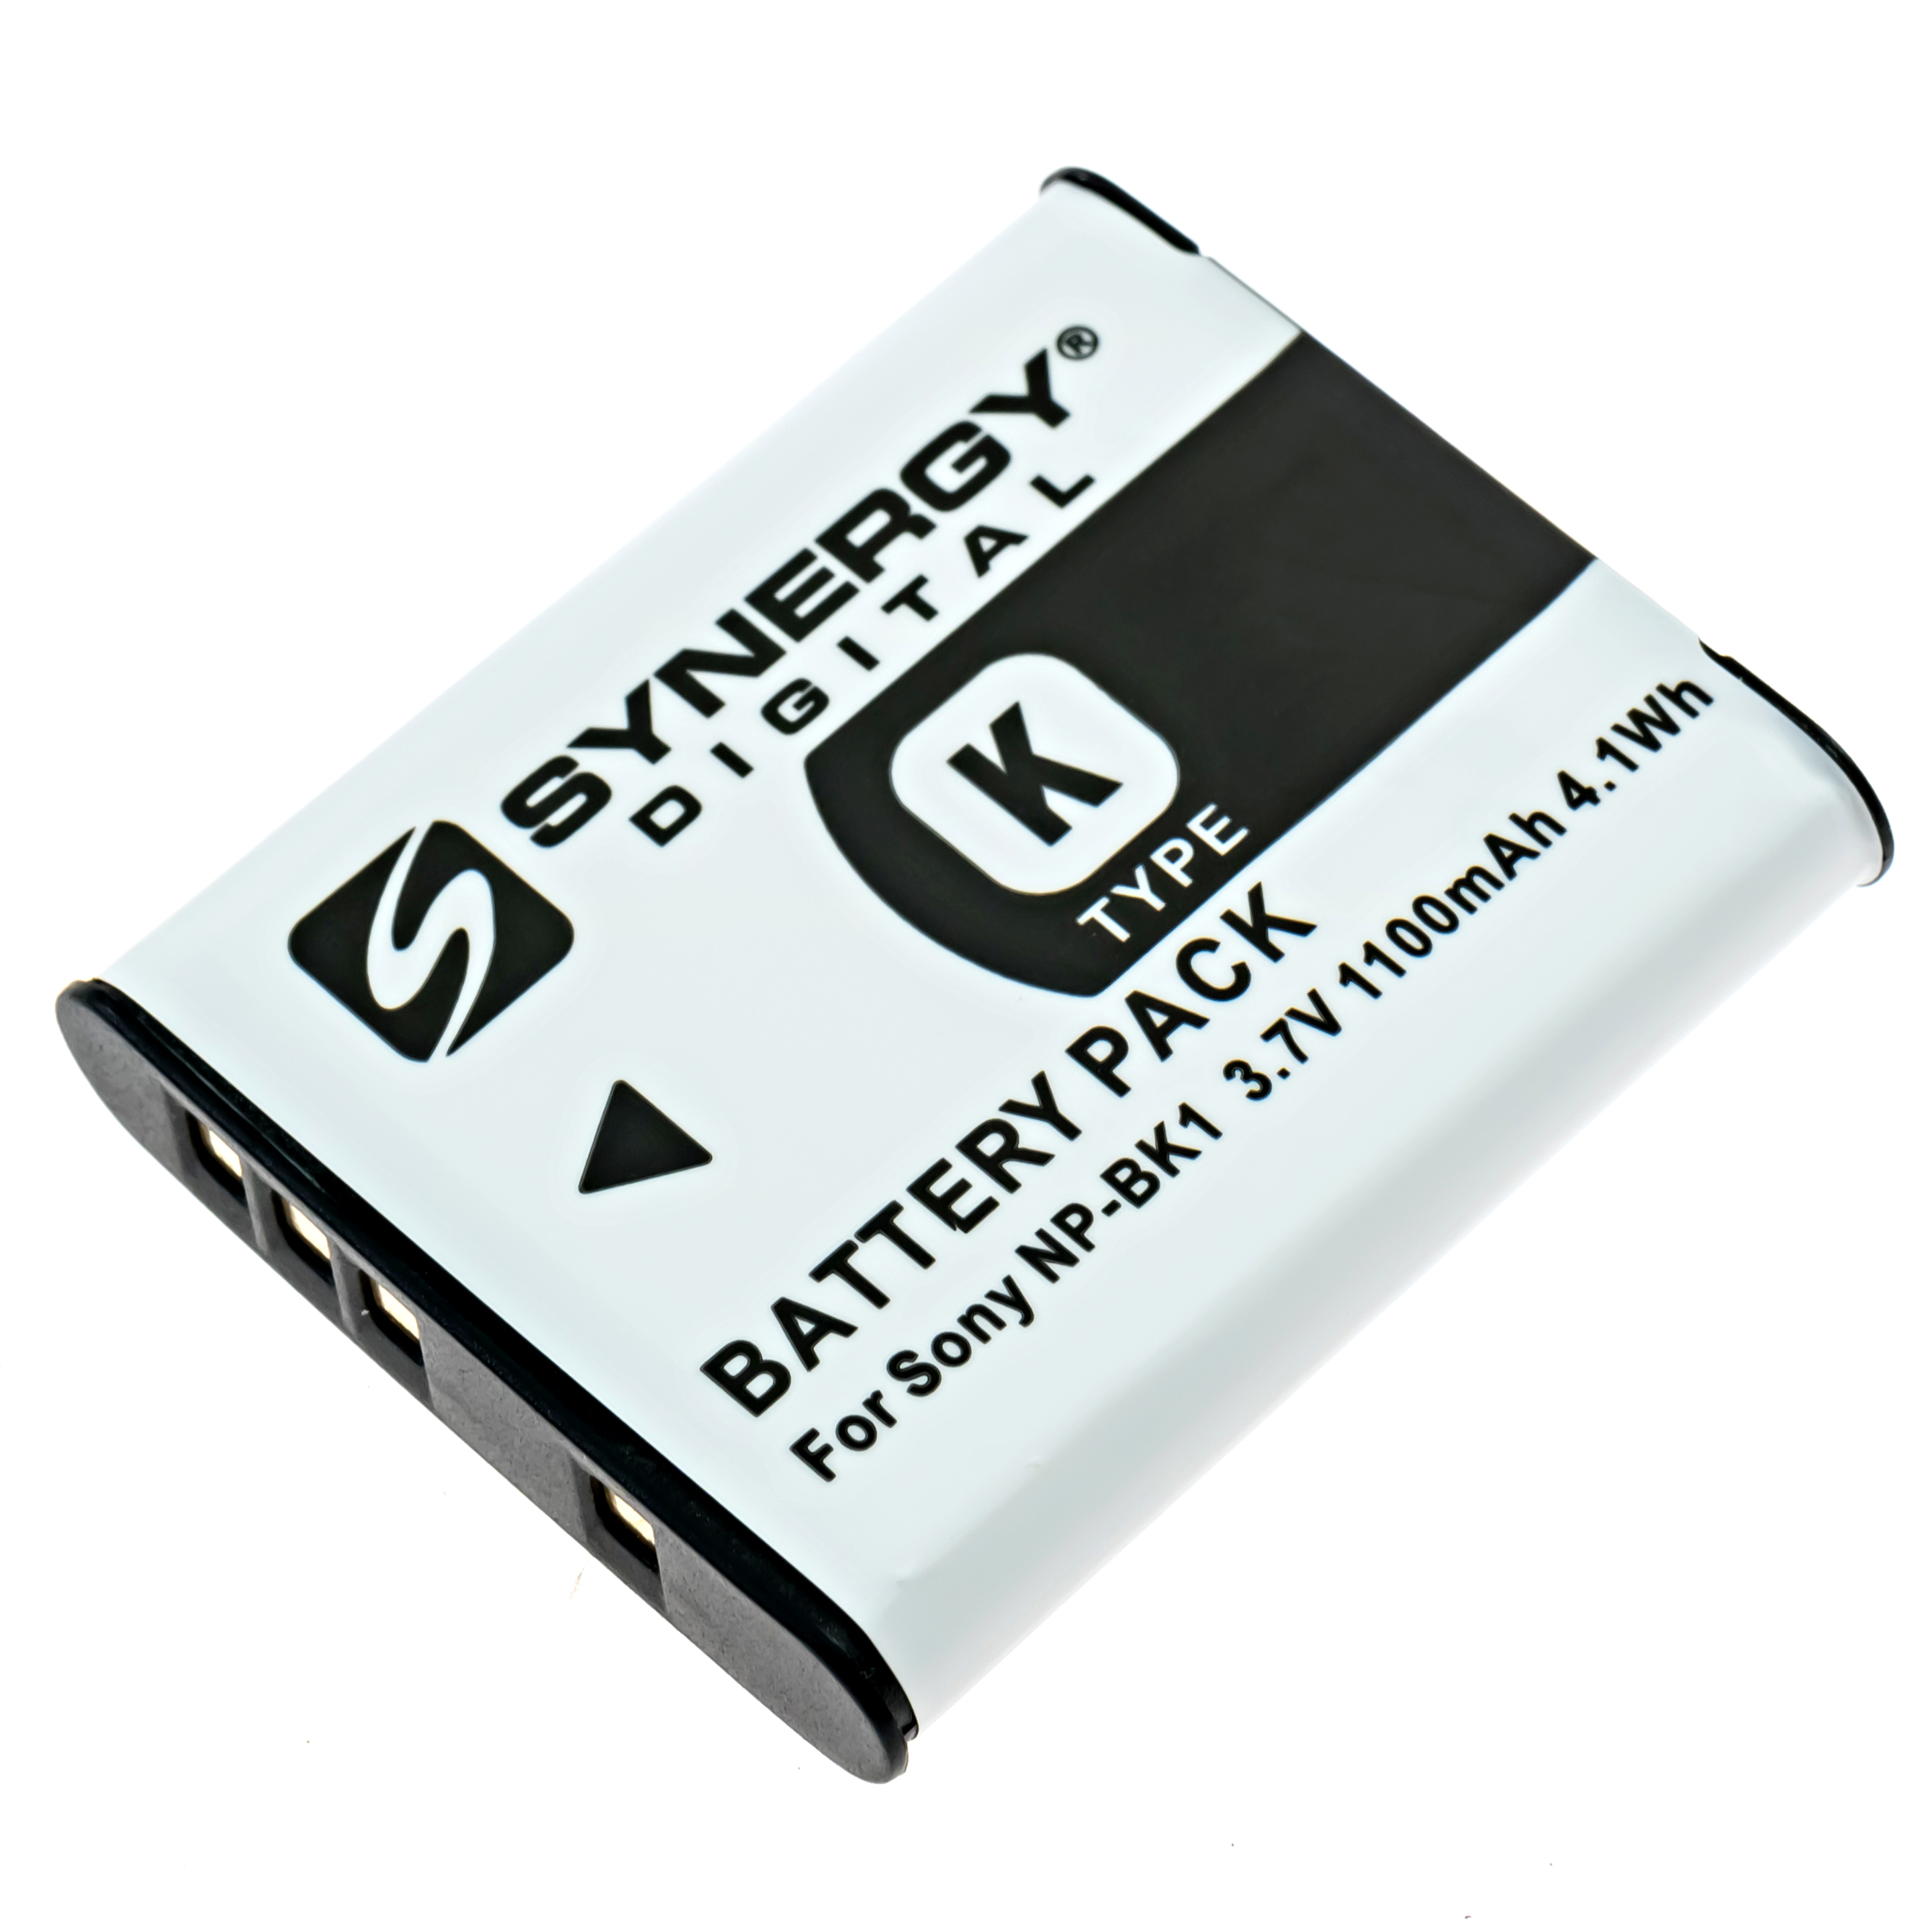 Synergy Digital Camera Battery, Compatible with Sony MHS-PM5, MHS-PM5/K Camera Battery (3.7, Li-ion, 1100mAh)